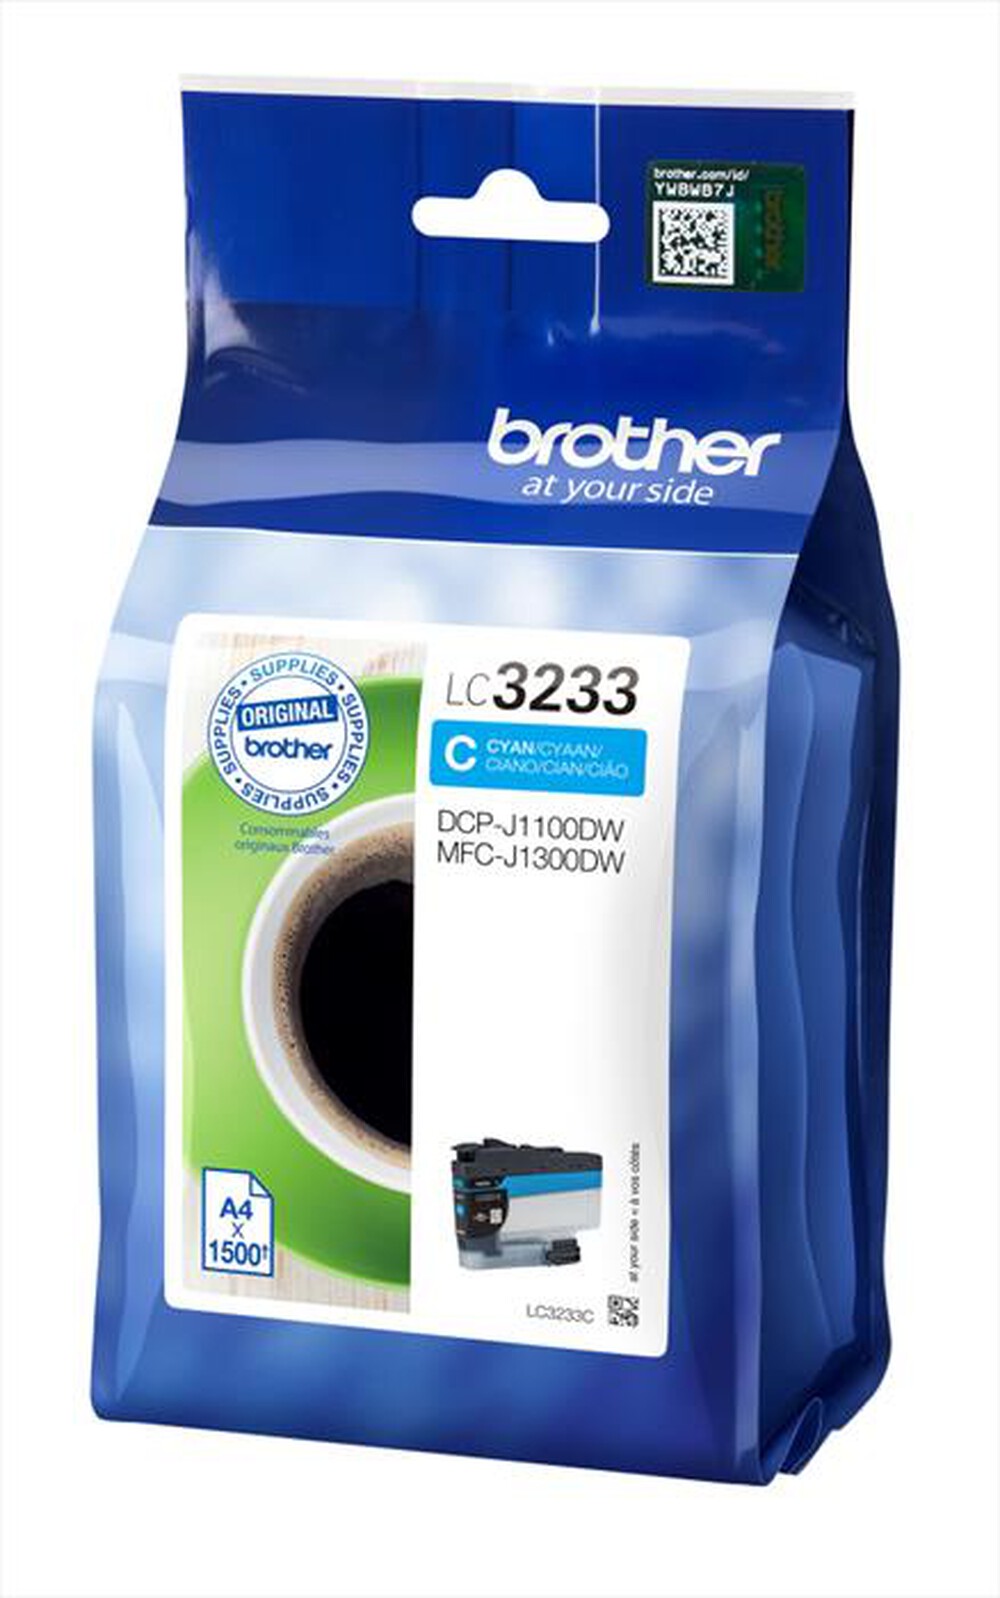 "BROTHER - LC3233C"